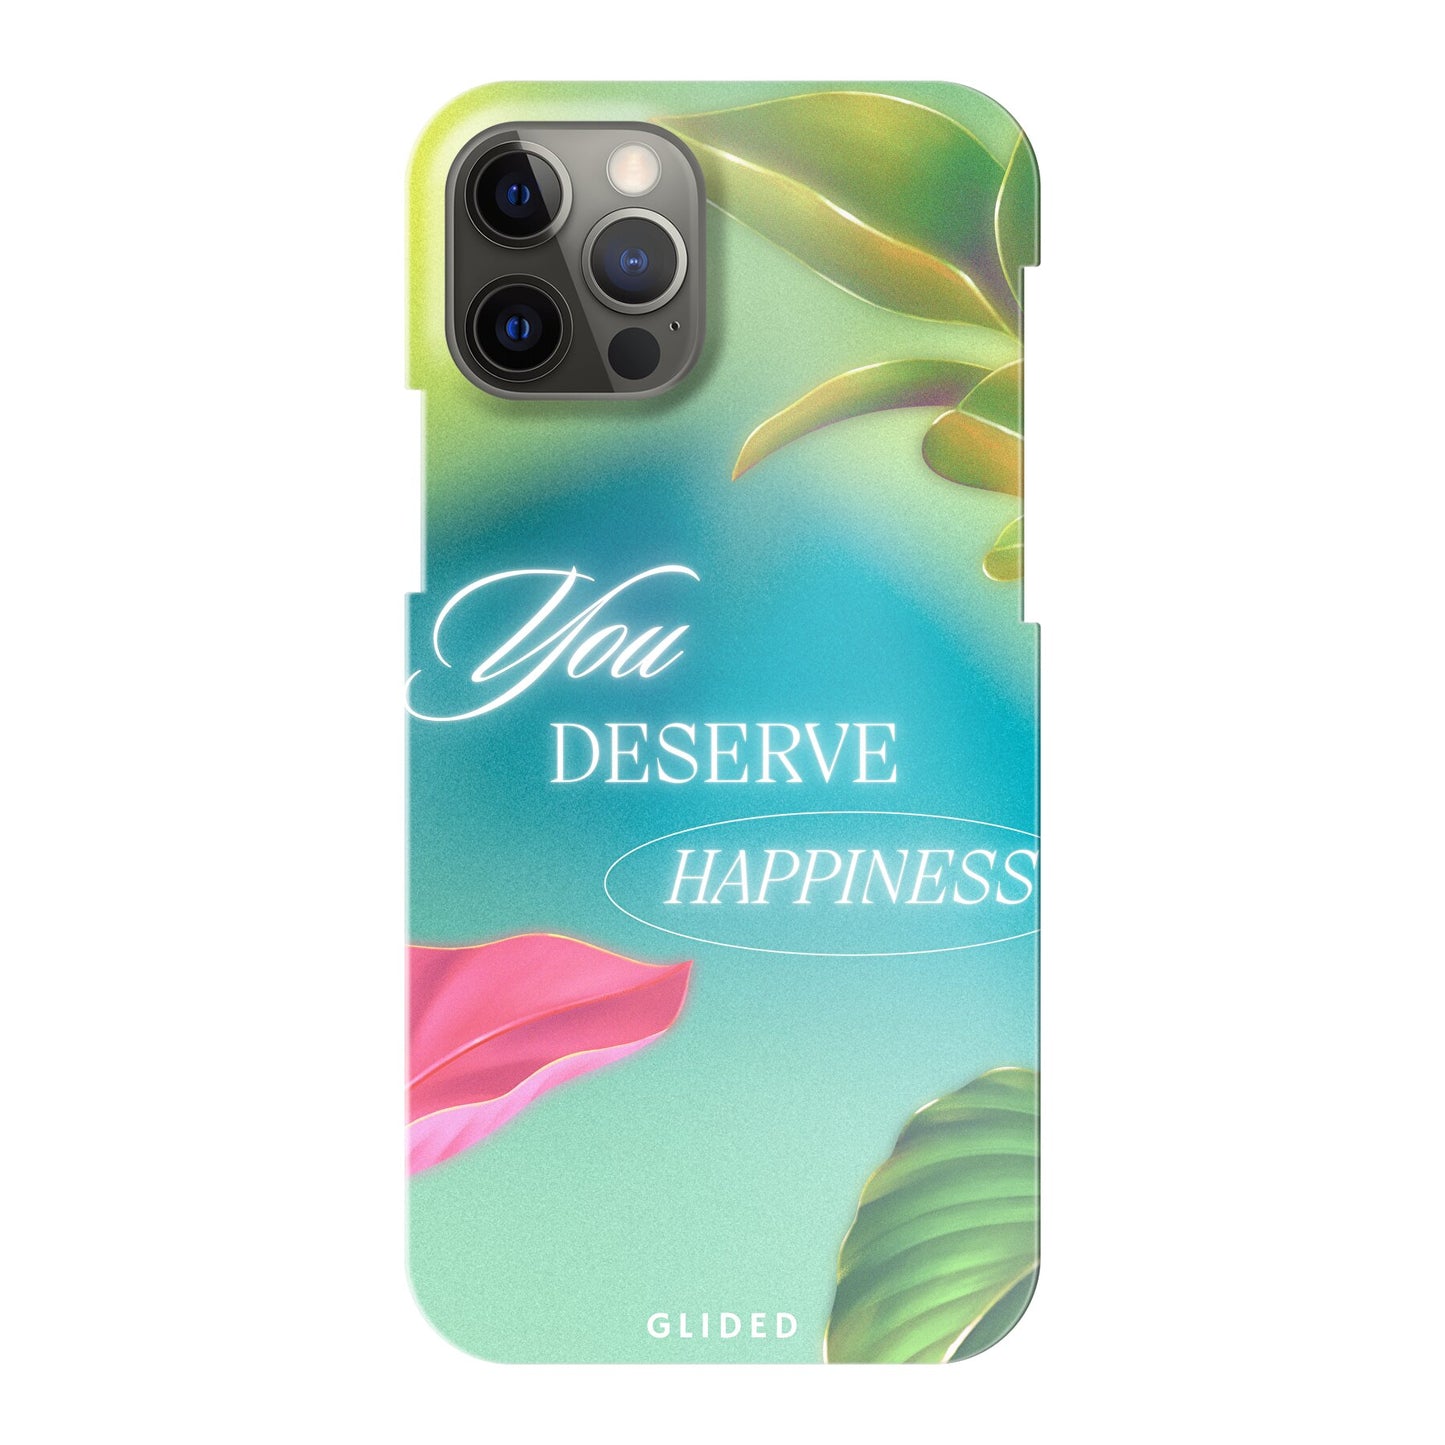 Happiness - iPhone 12 - Hard Case